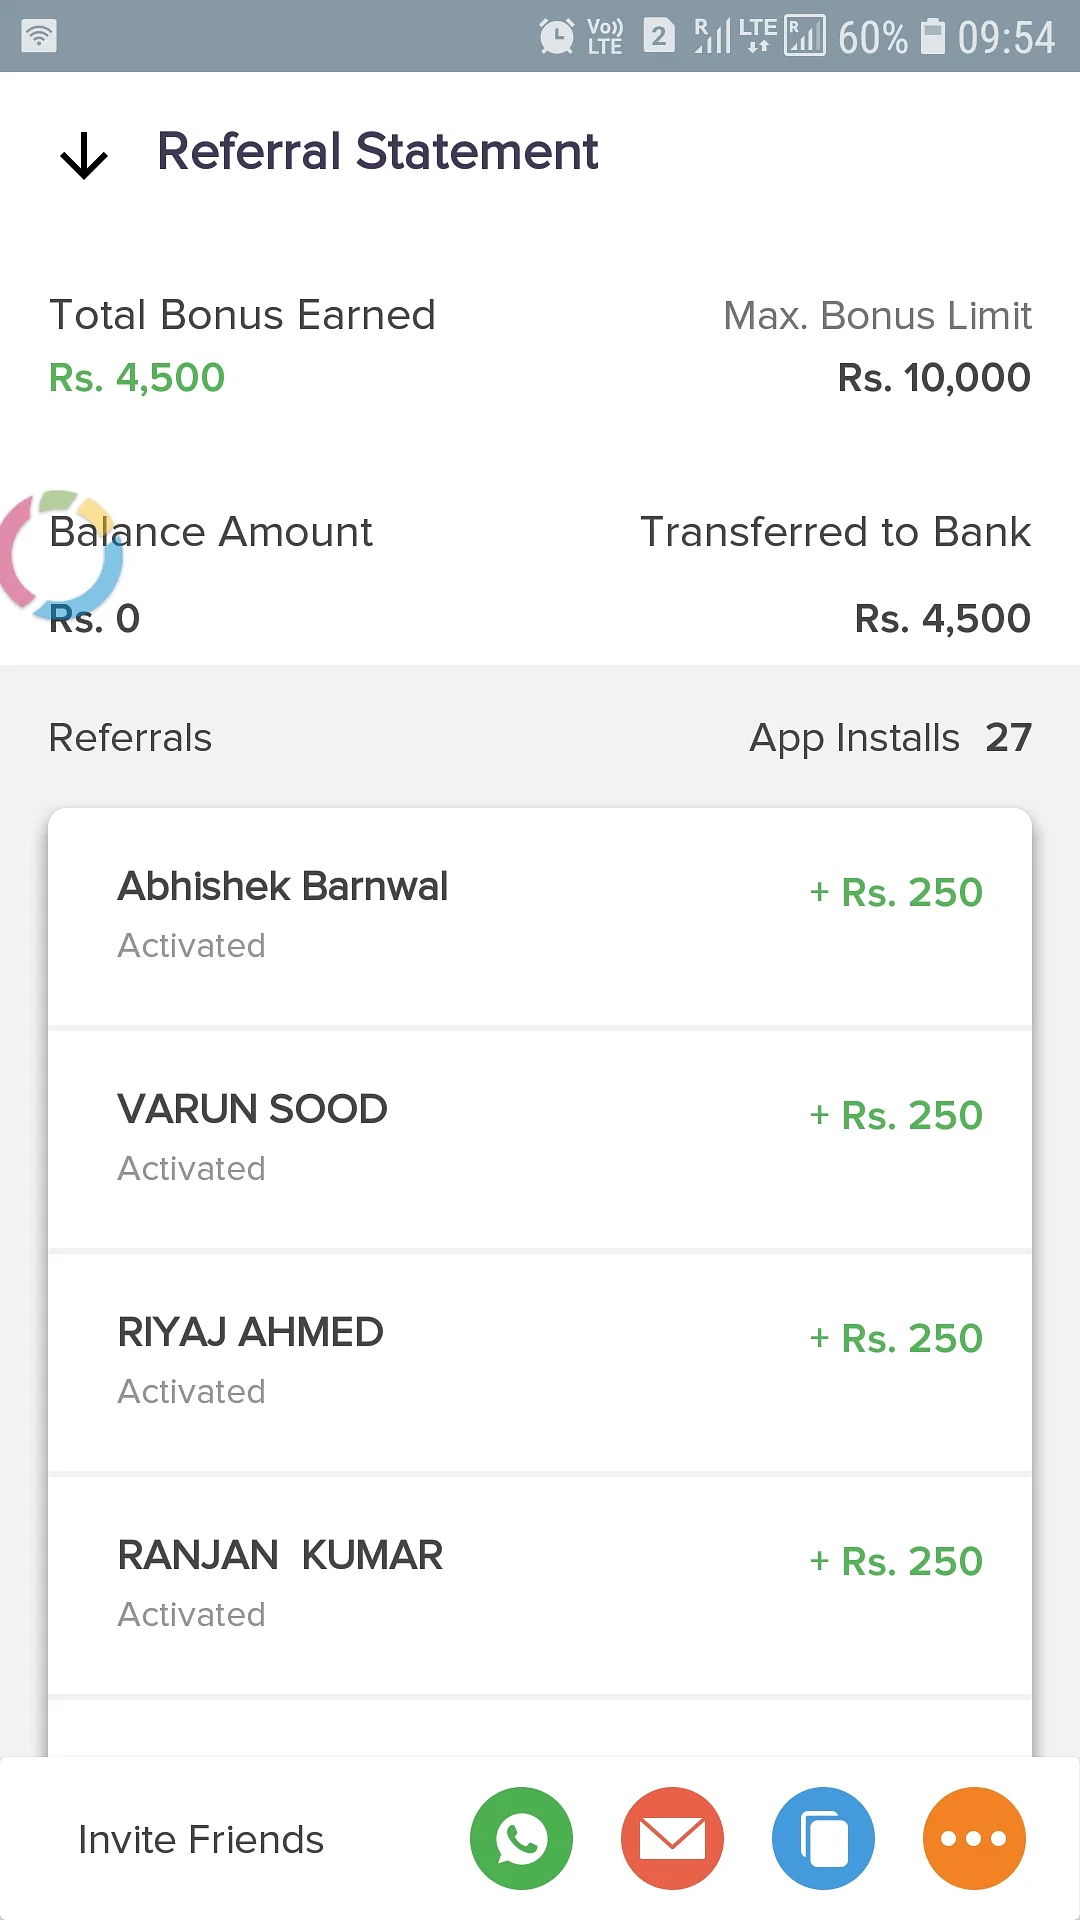 Here's the referral earnings proof that I earn with ETMoney referral code link